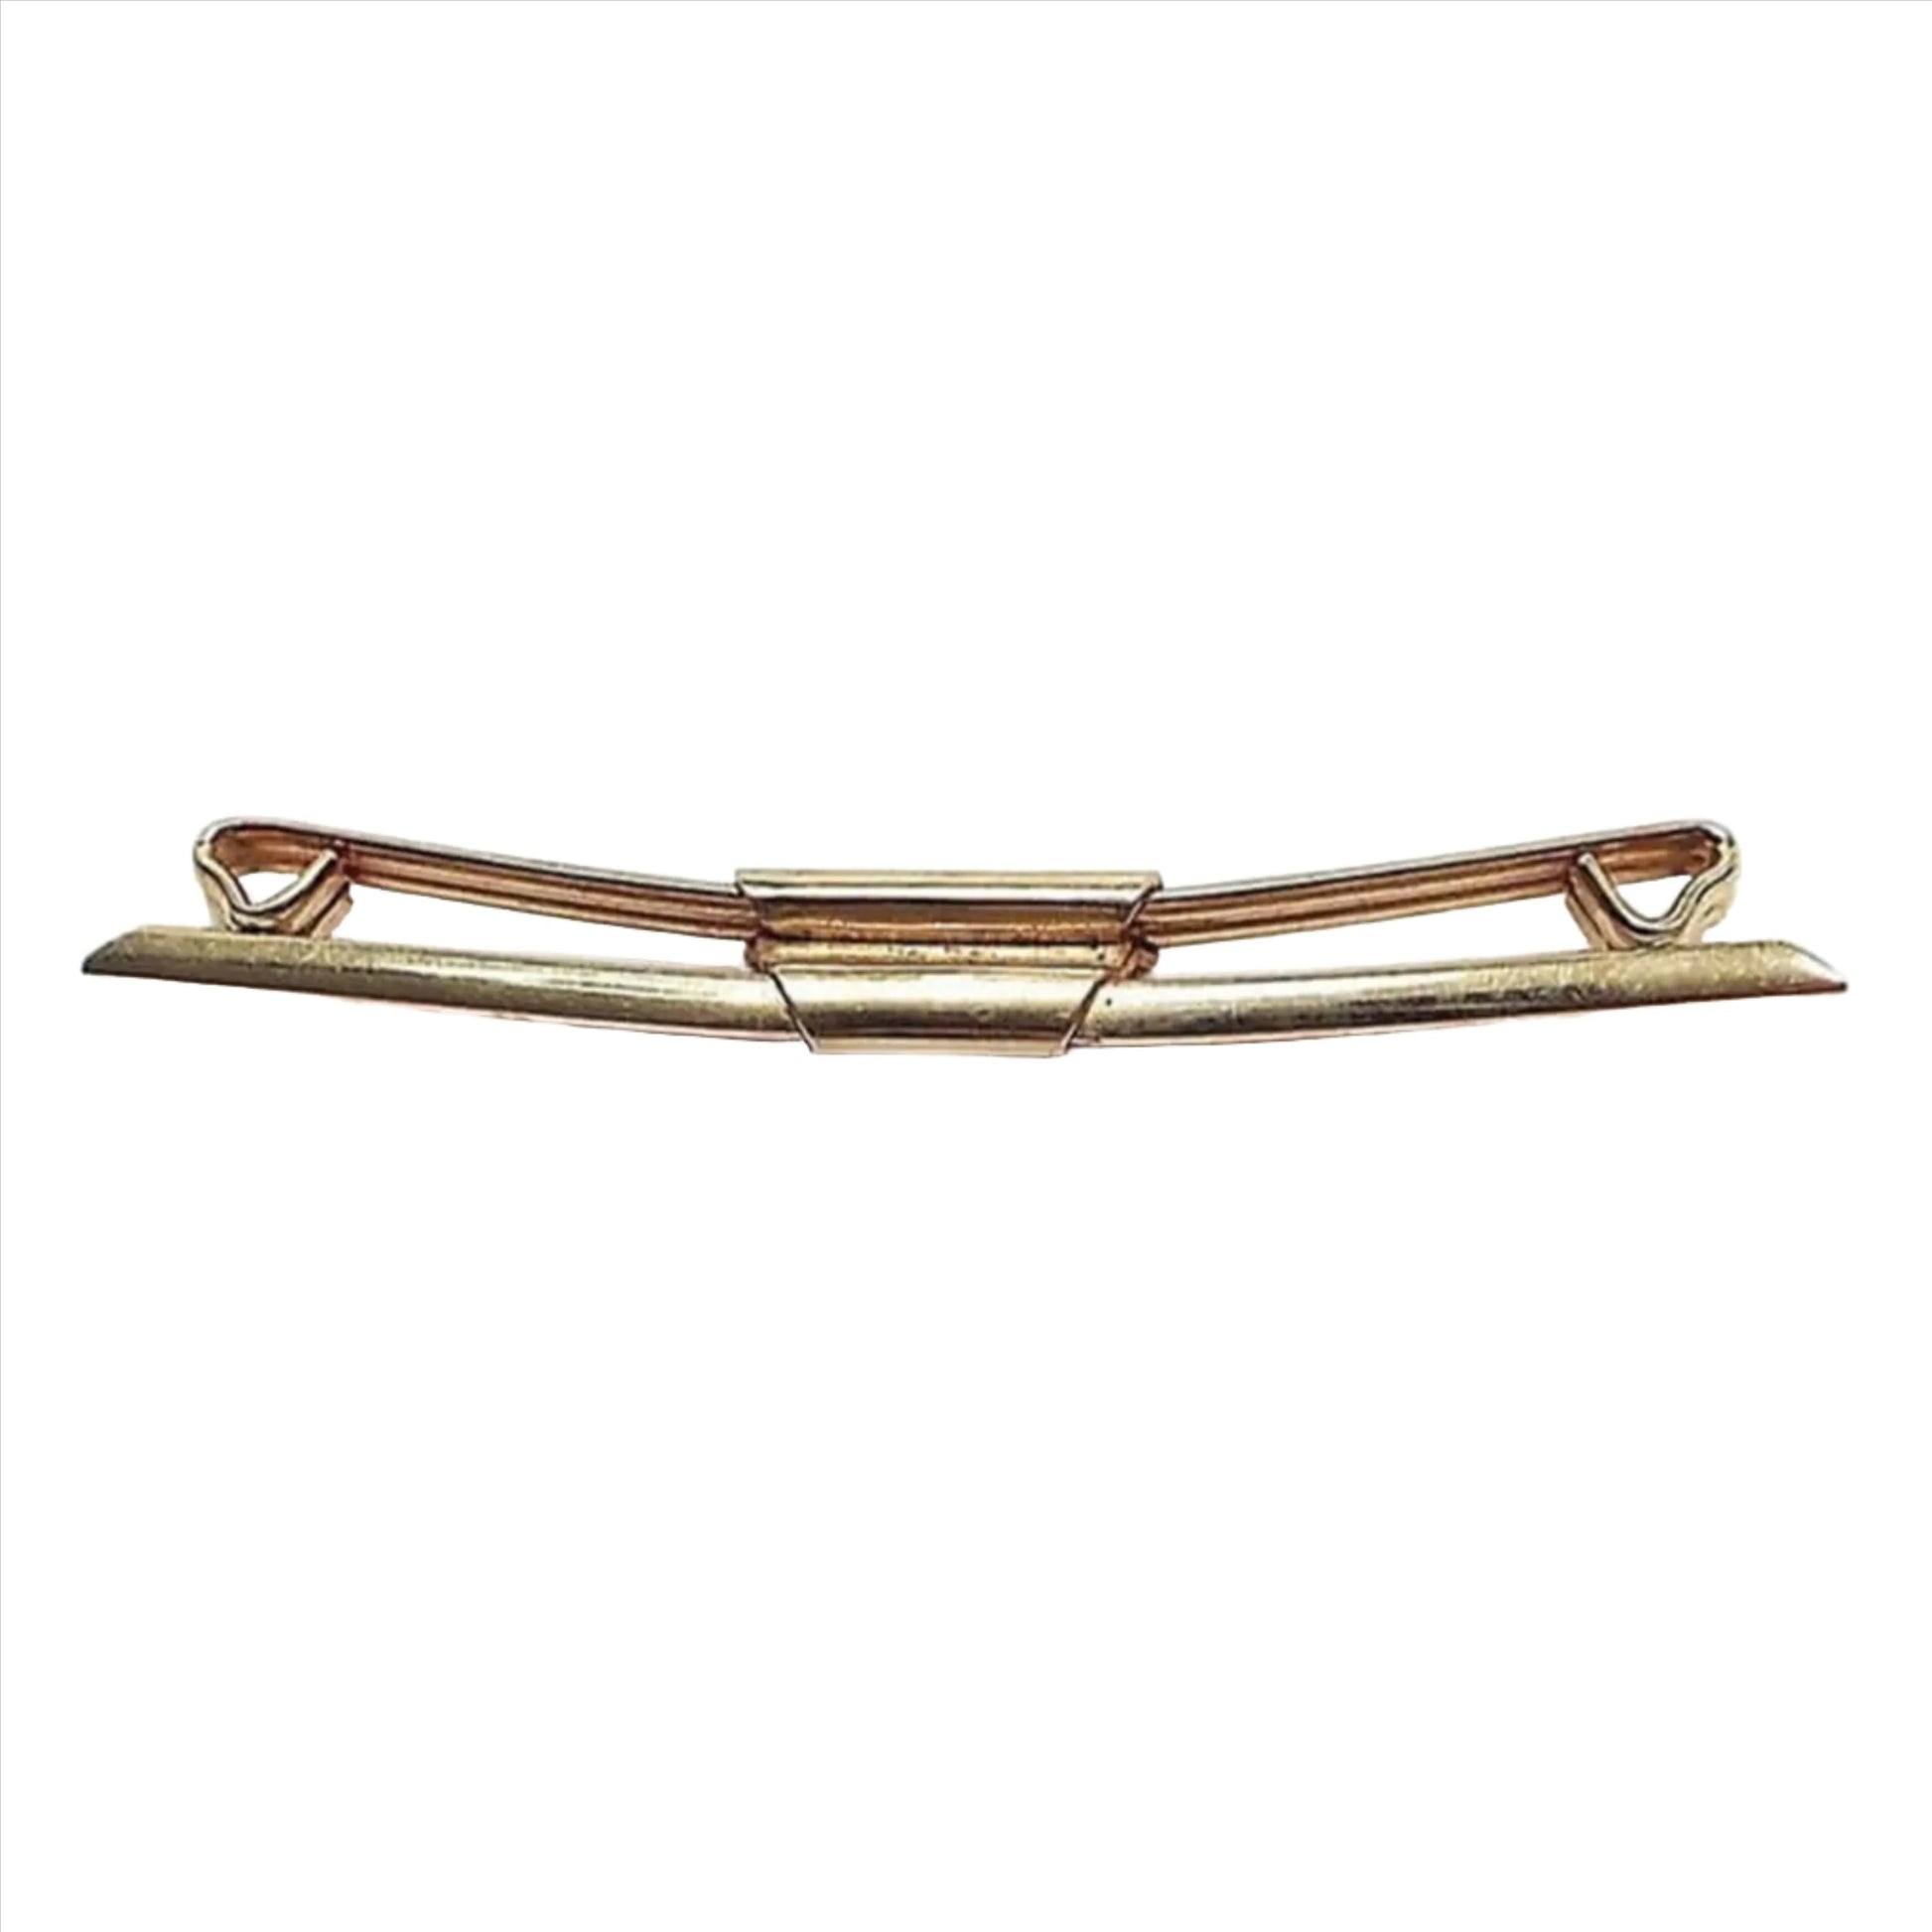 Side view of the 1930's Art Deco Swank vintage collar clip. It is gold tone in color and has angled front and tapered ends.